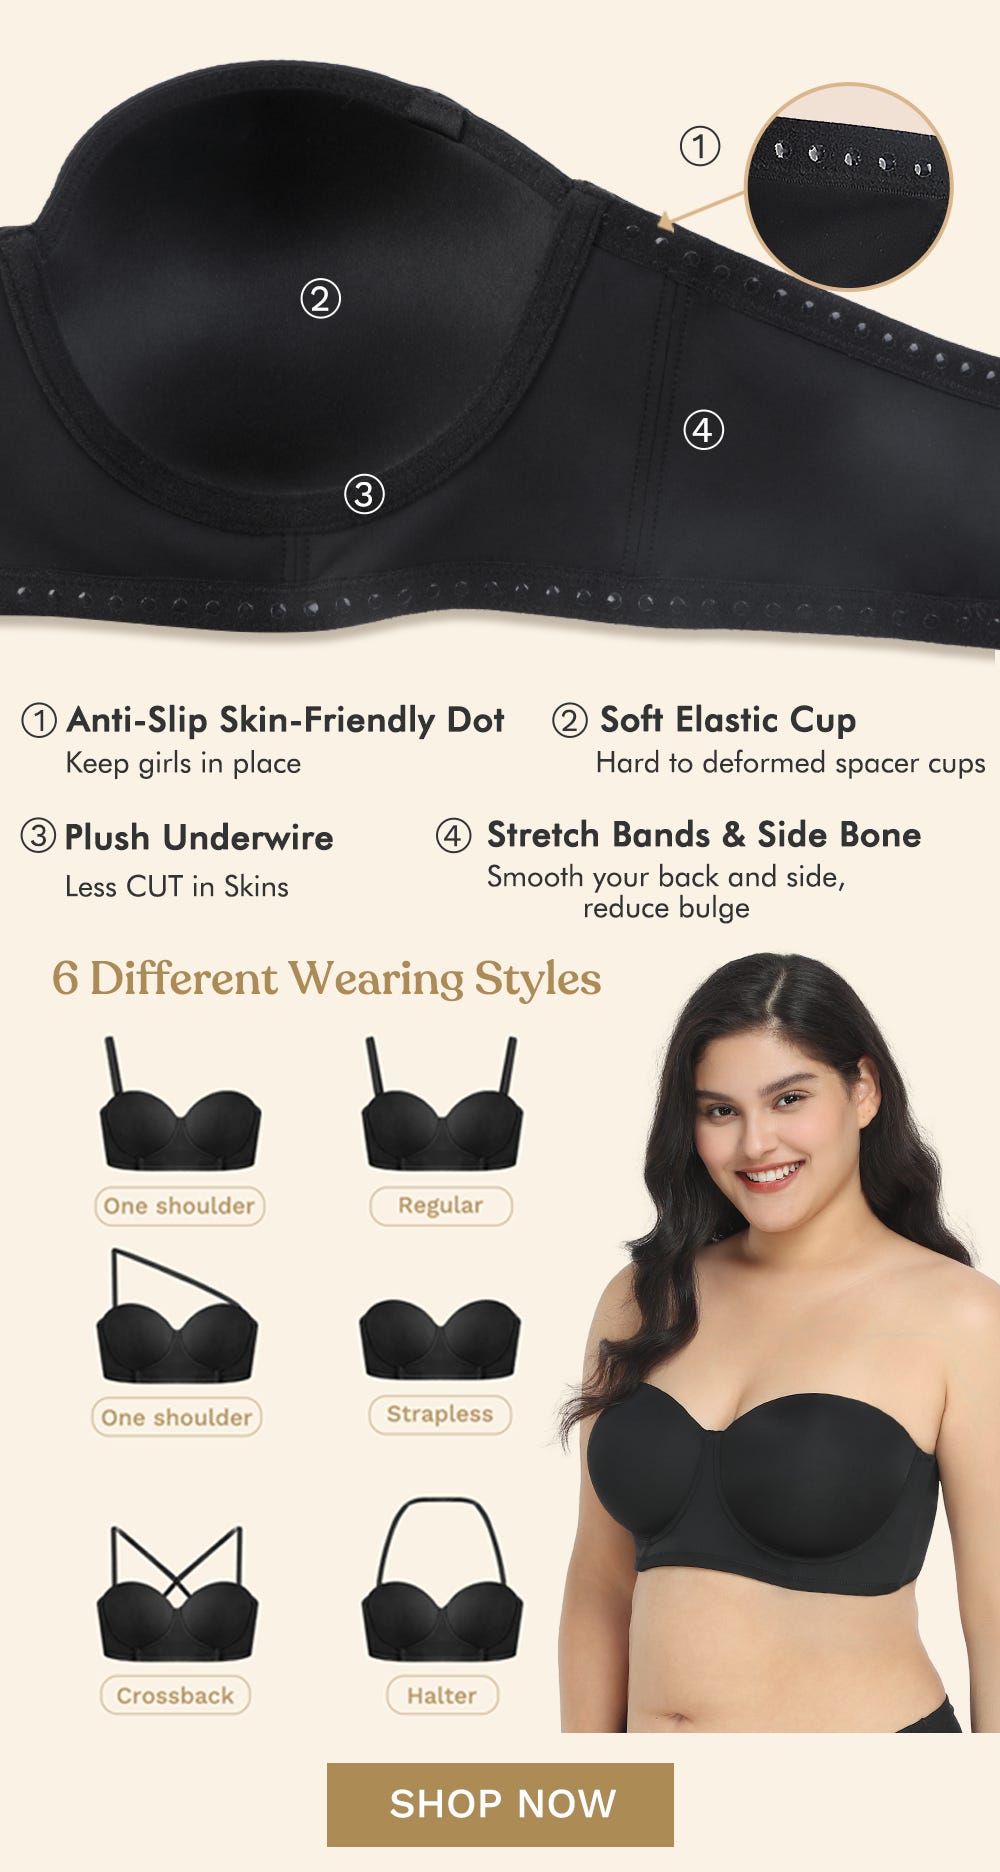 Bra Styles for Special Occasions. Special occasions often require